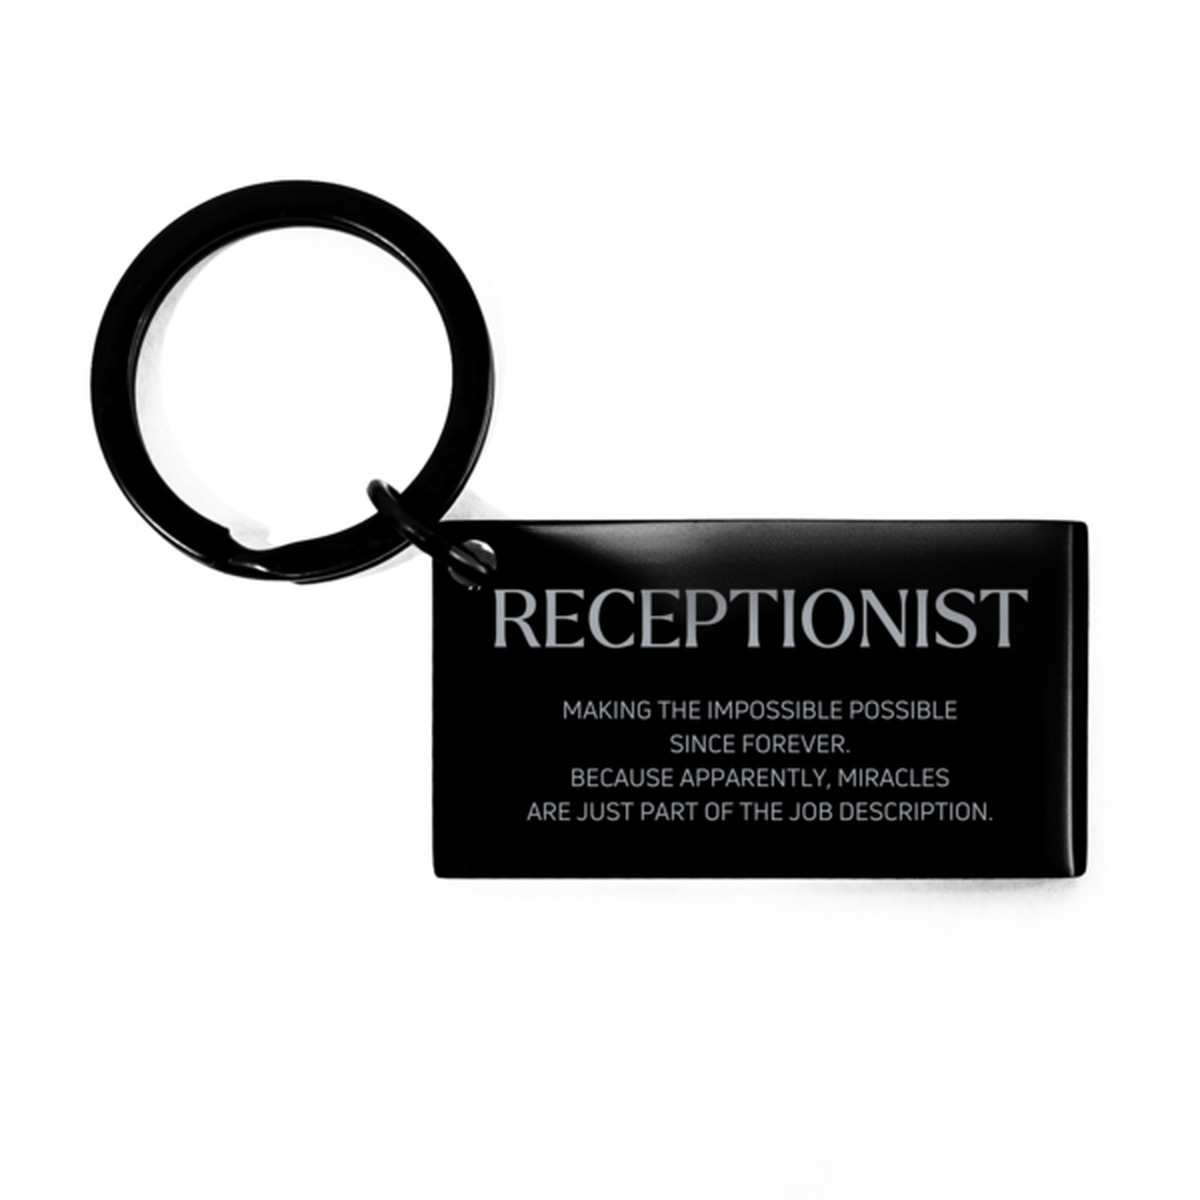 Funny Receptionist Gifts, Miracles are just part of the job description, Inspirational Birthday Keychain For Receptionist, Men, Women, Coworkers, Friends, Boss